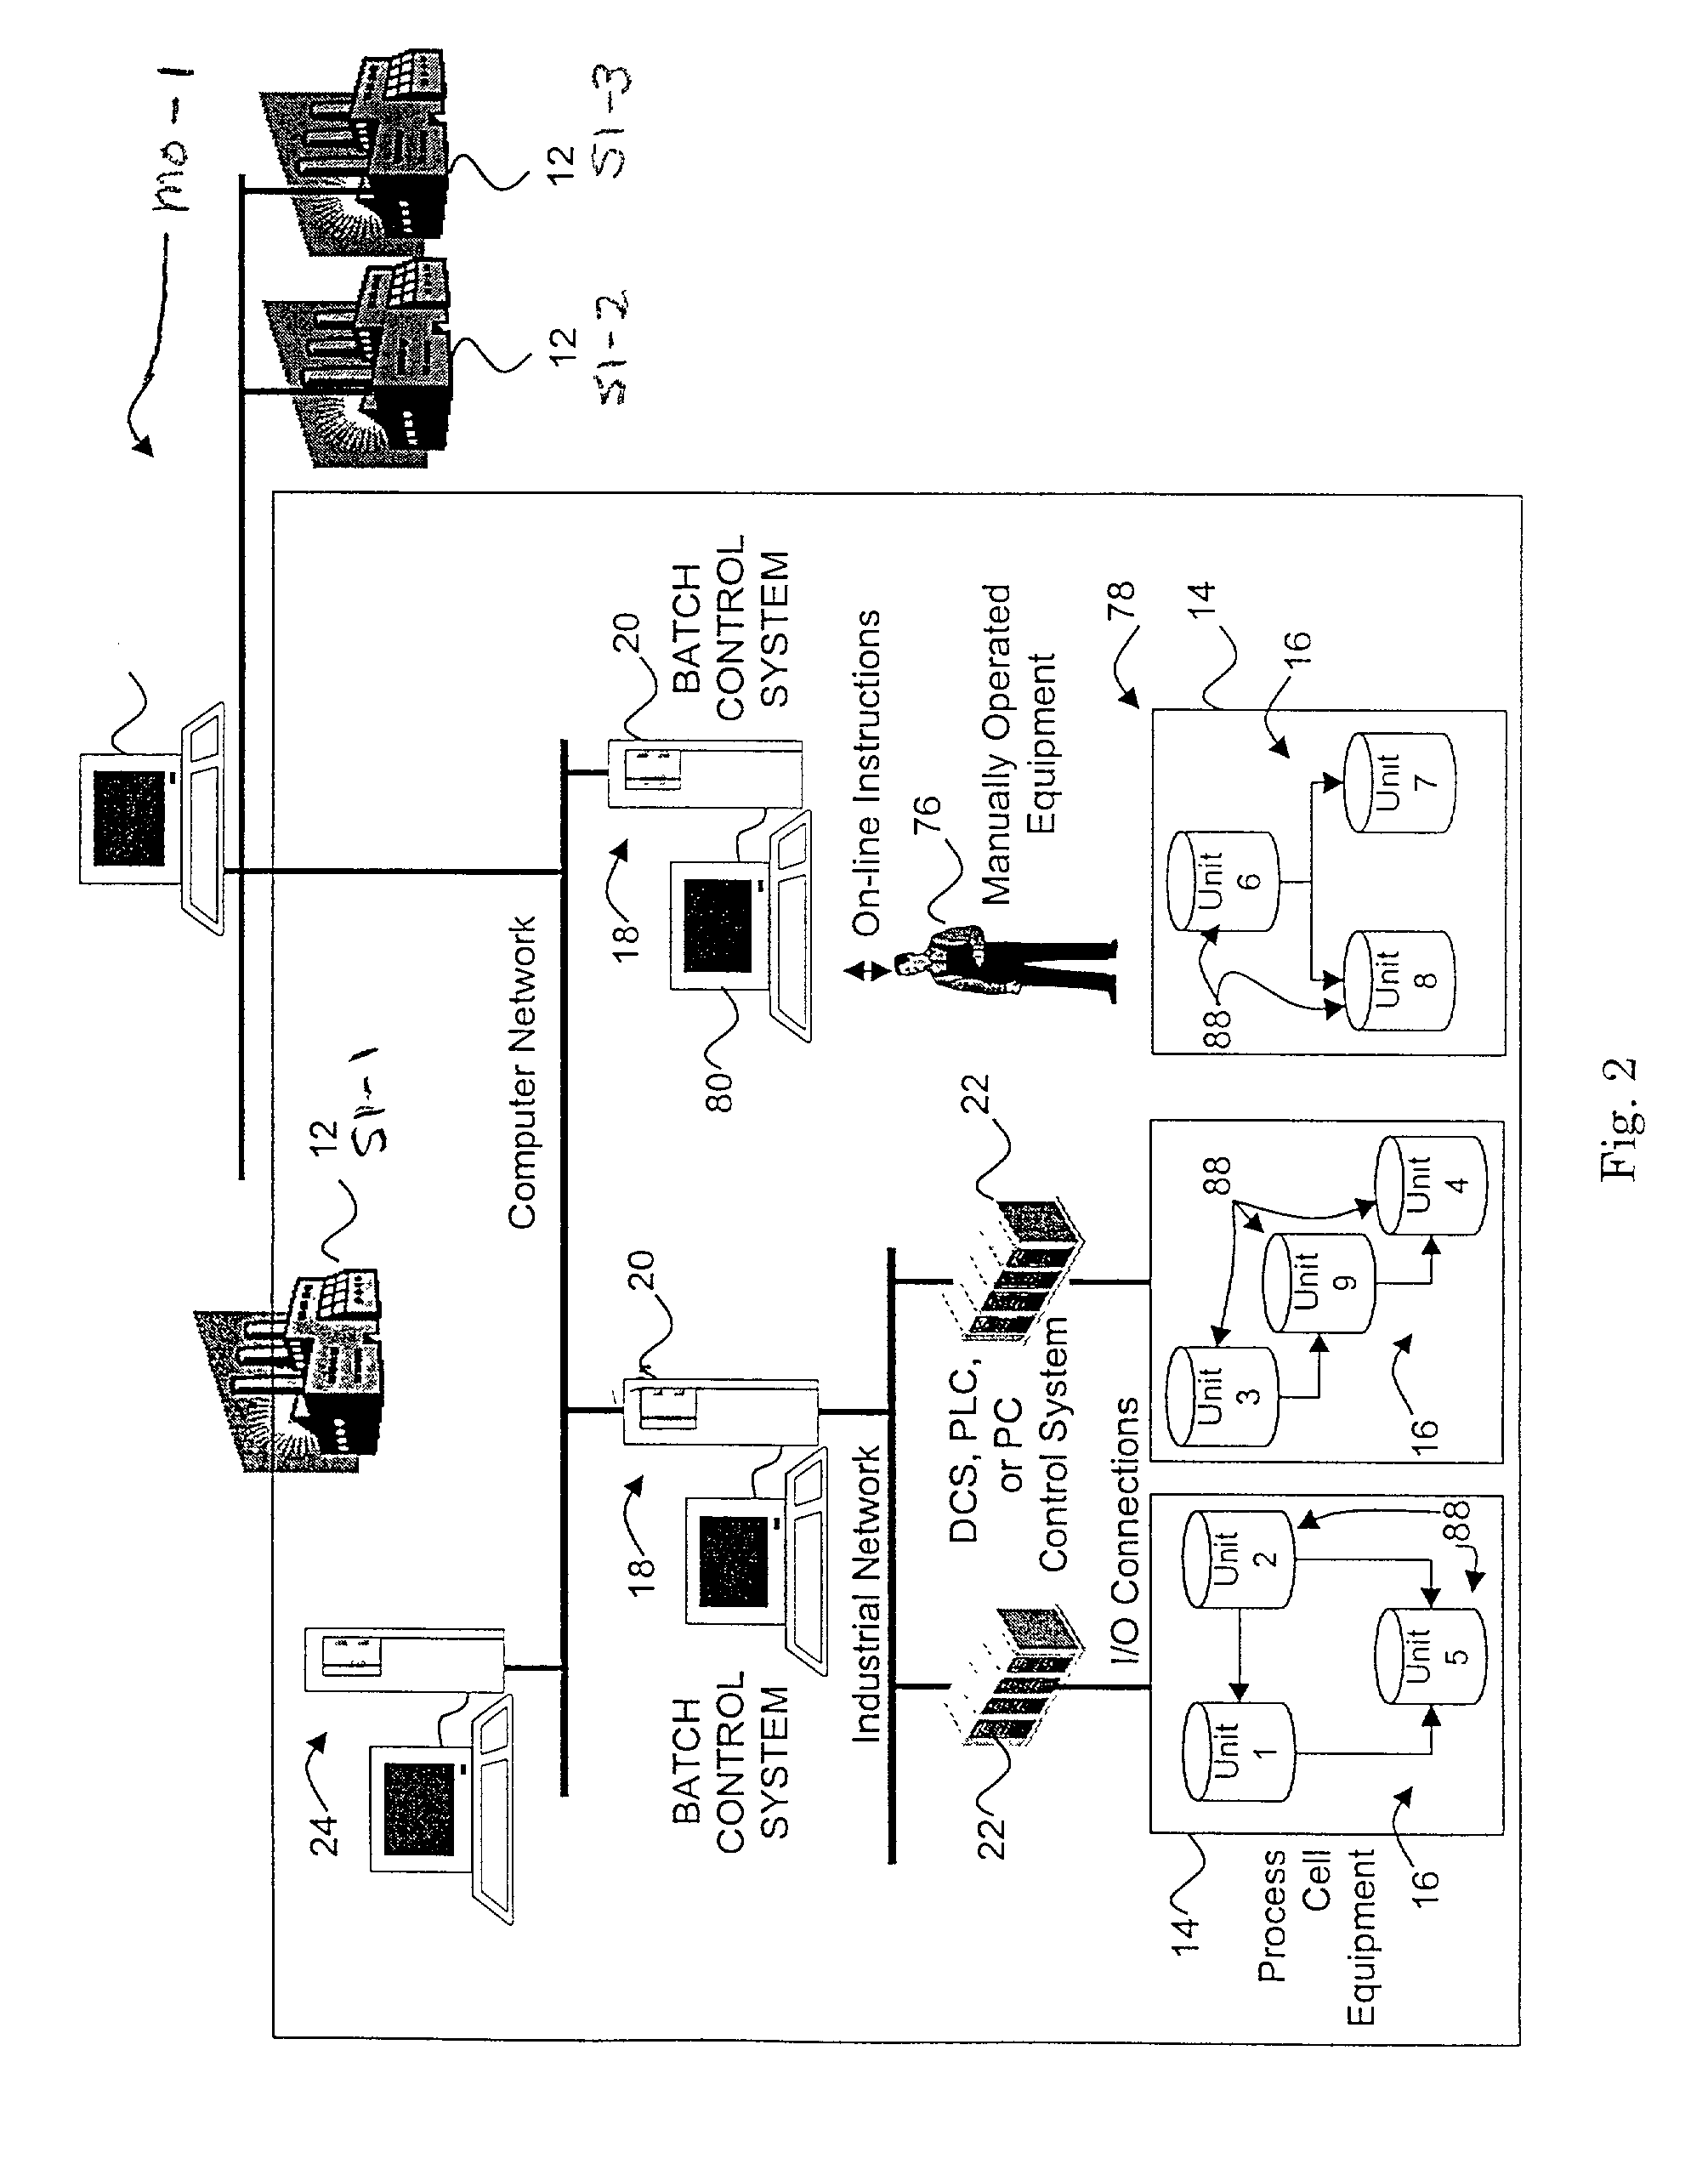 System and method for facilitating transactions between product brand managers and manufacturing organizations